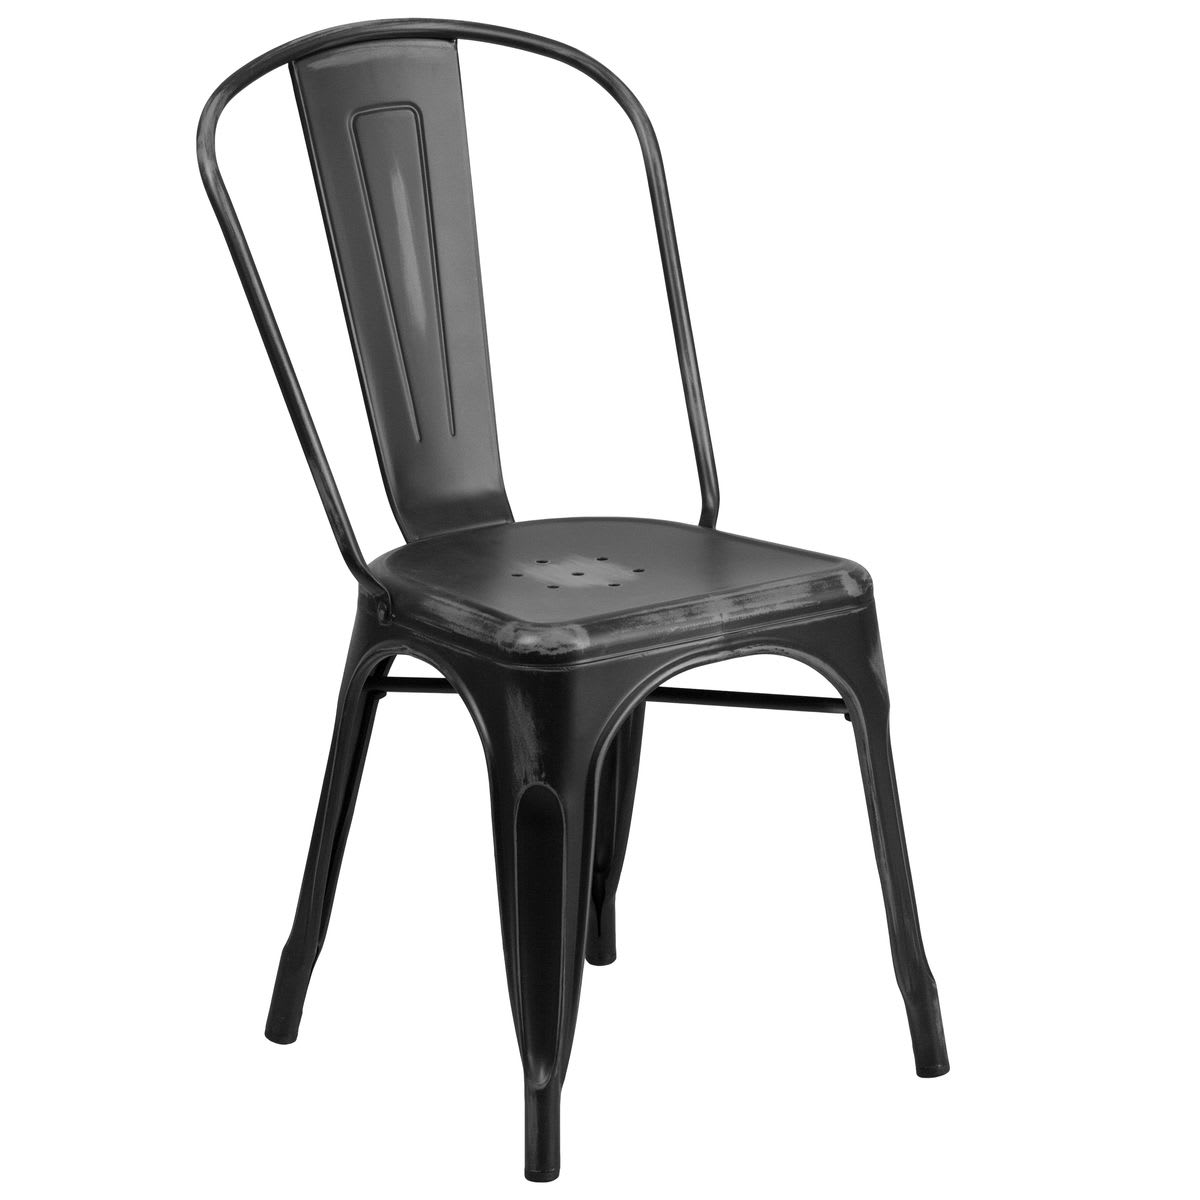 Bistro Style Metal Chair in Distressed Black Finish